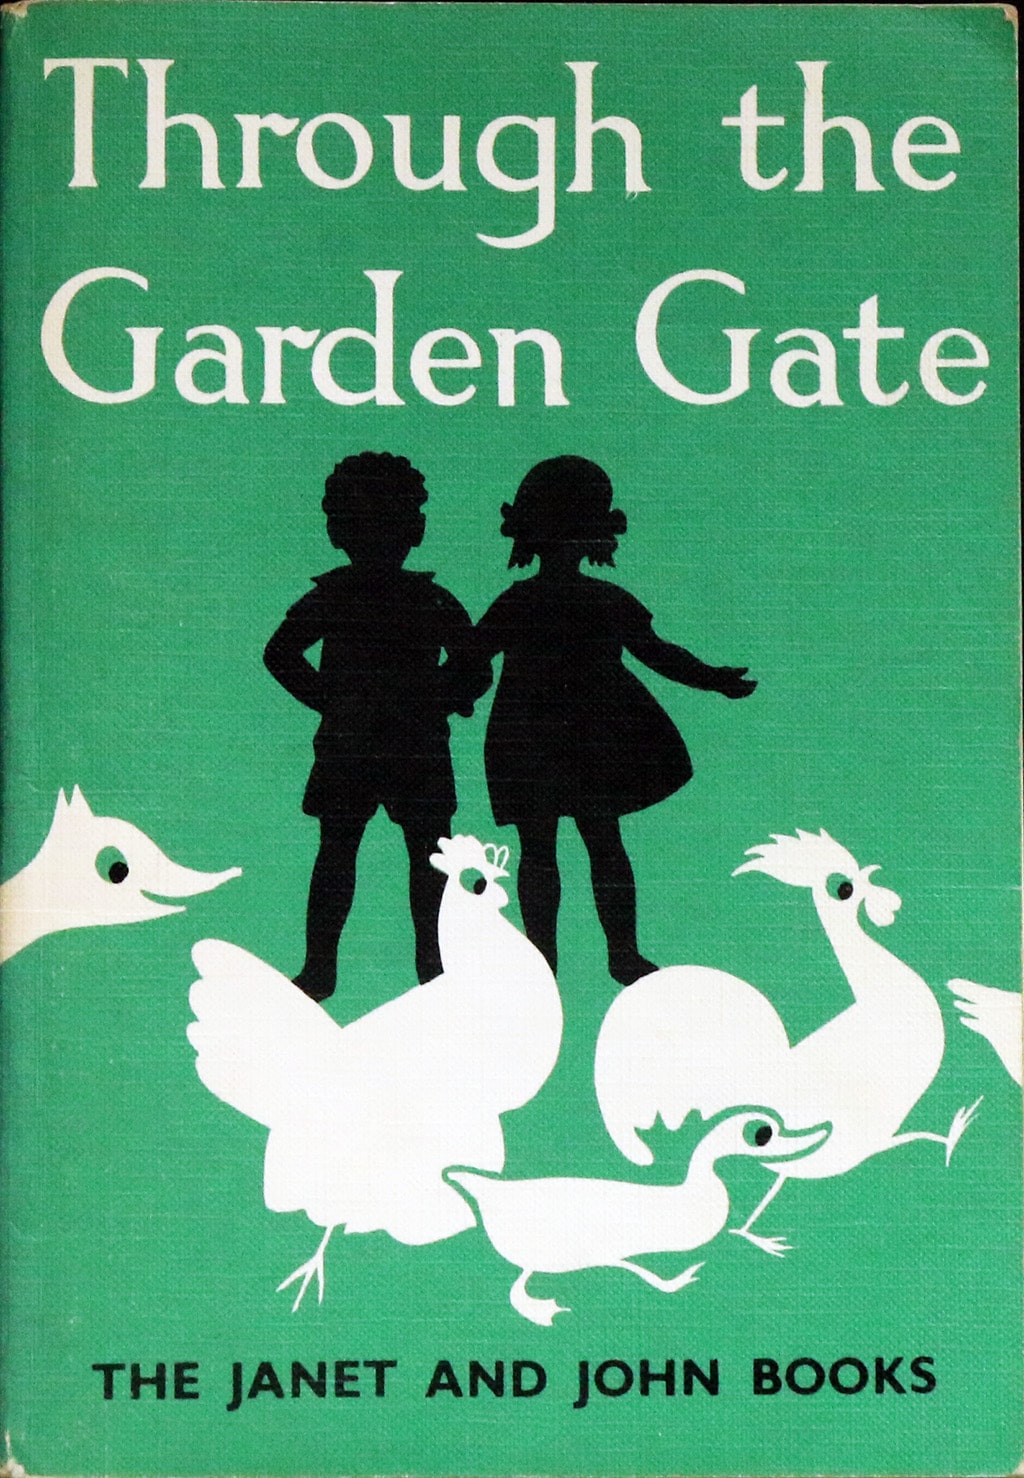 Through the Garden Gate front cover. The Janet and John books. It shows the silhouette of a boy and girl with some farmyard animals.